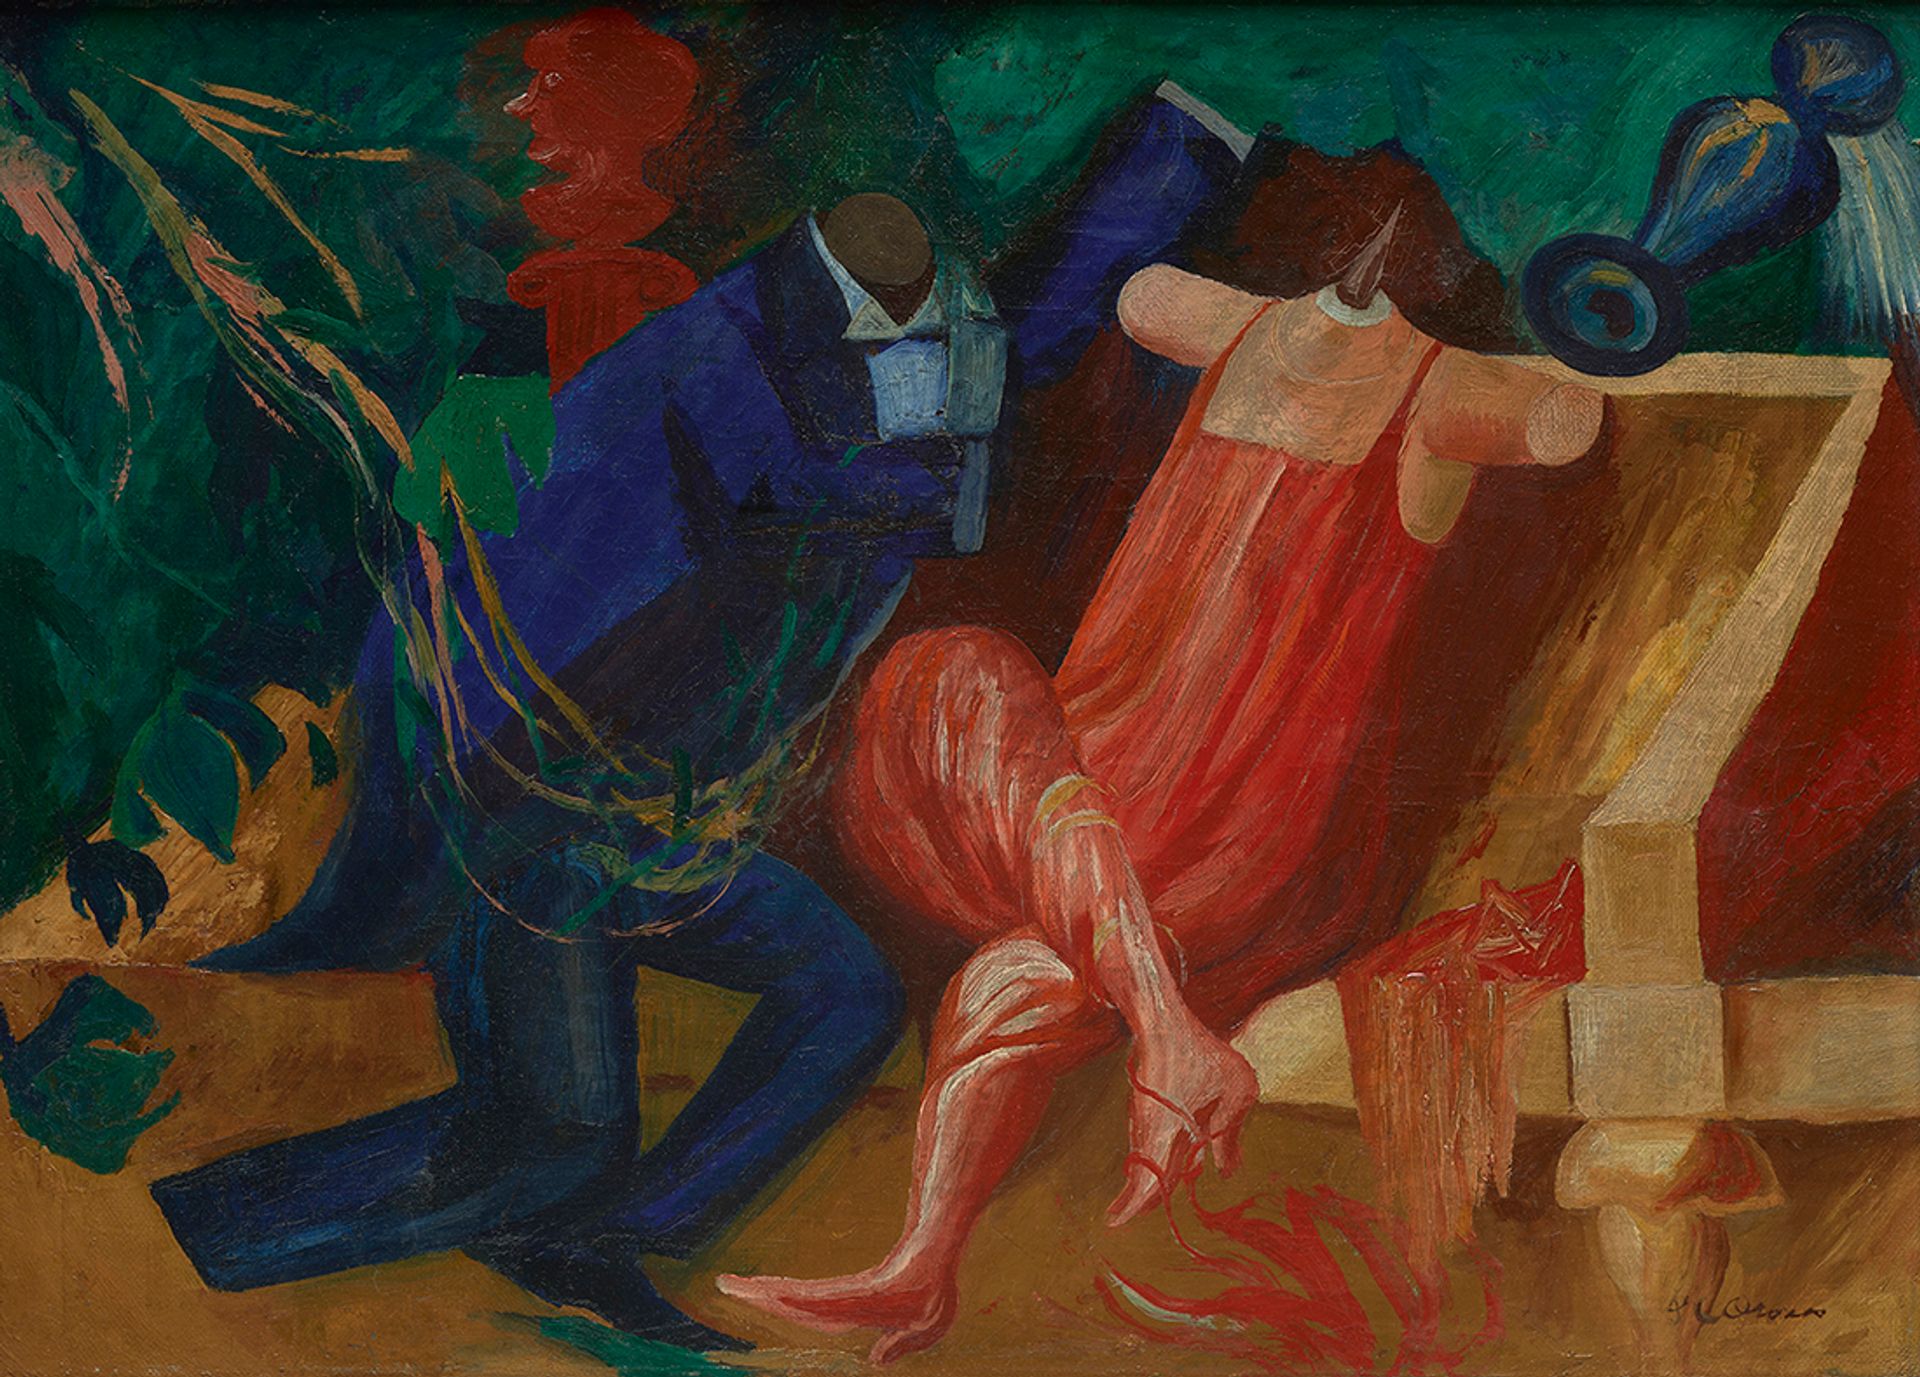 José Clemente Orozco's Mannikins (1930) is a promised gift to the DMA from Nancy and Jeremy Halbreich 